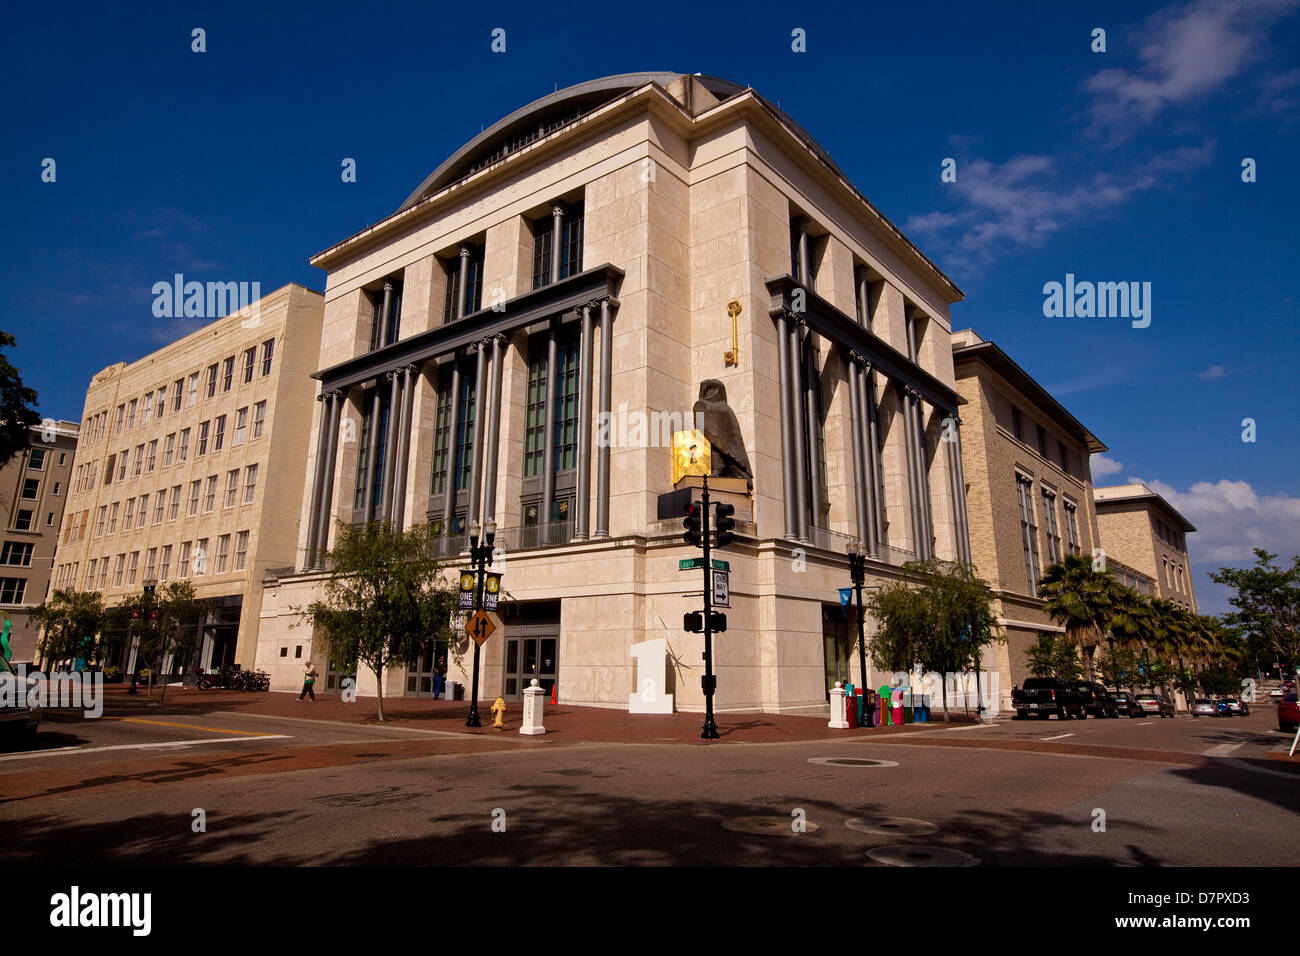 The Museum of Contemporary art is seen in Jacksonville, Florida Stock Photo